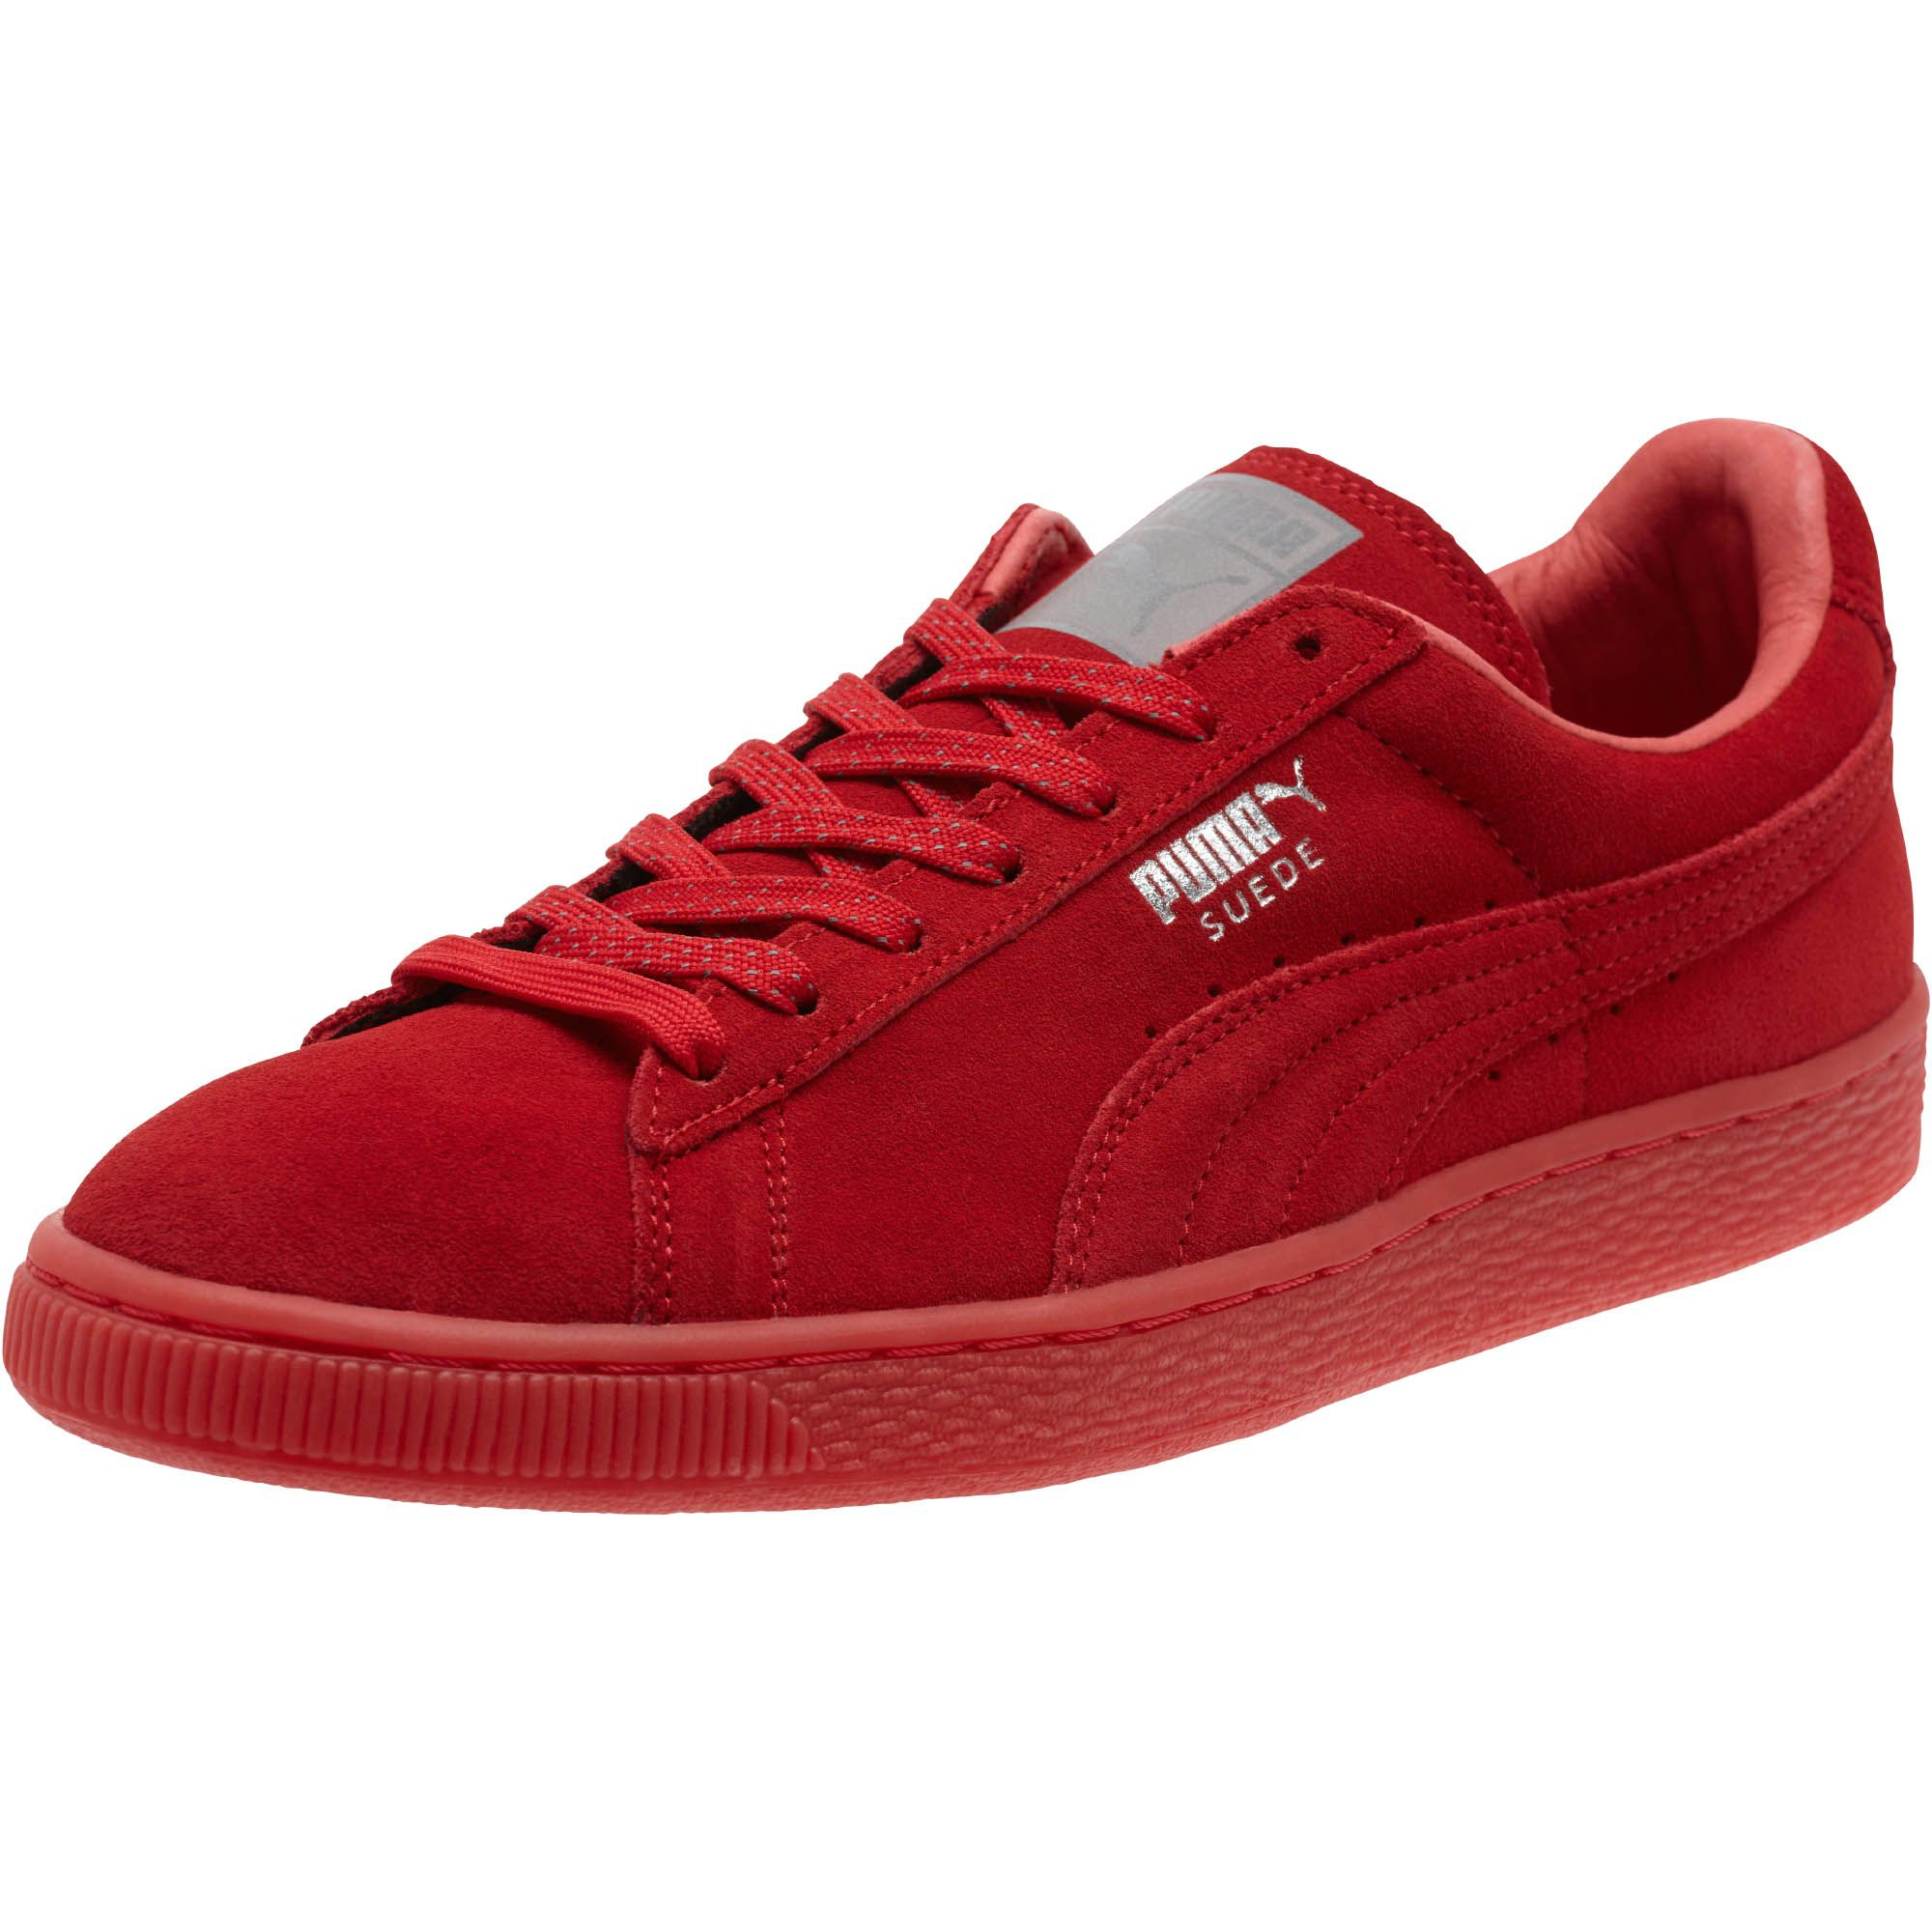 PUMA Suede Classic Mono Iced Women's Sneakers in Red - Lyst